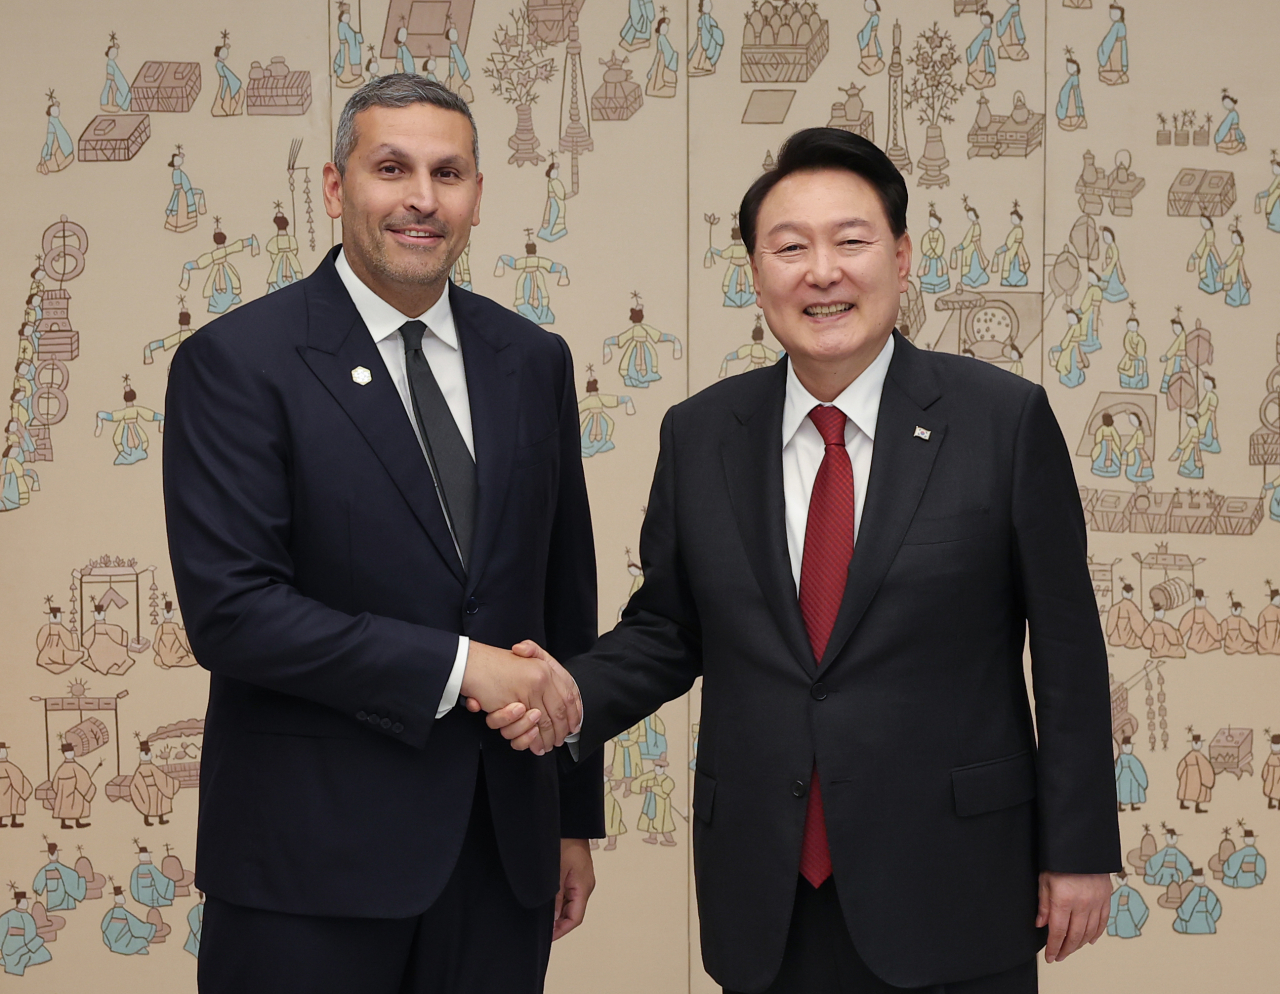 President Yoon Suk Yeol (right) shakes hands with Khaldoon Khalifa Al Mubarak, chairman of the Executive Affairs Authority of Abu Dhabi, during their meeting at the presidential office in Seoul on Tuesday. (Yonhap)